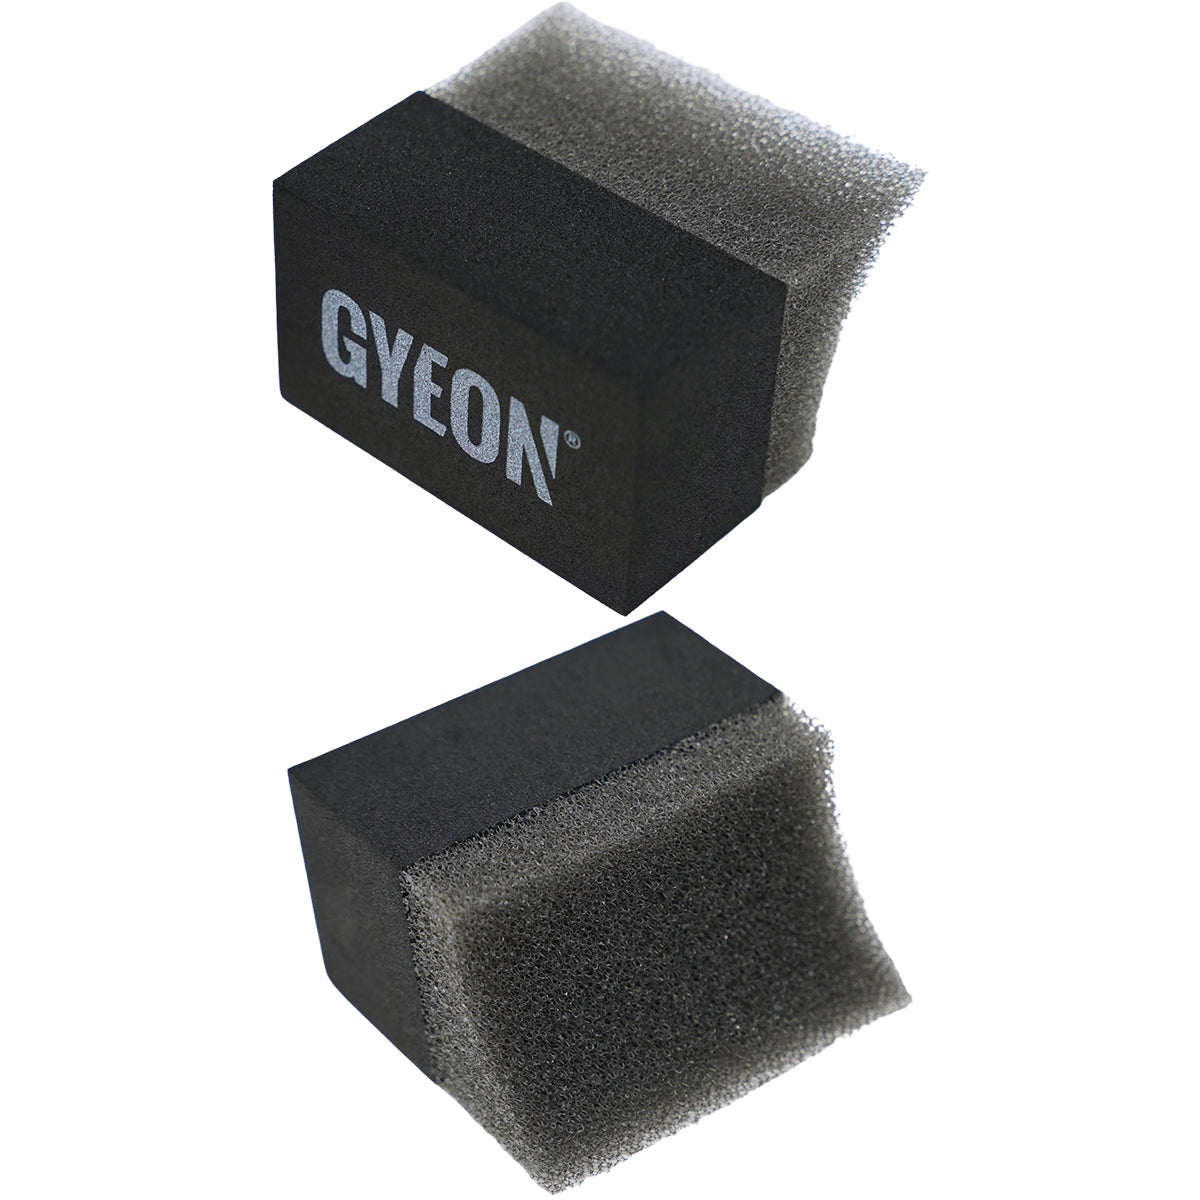 Gyeon Q2M Tire Applicator - Small, Pack of 2